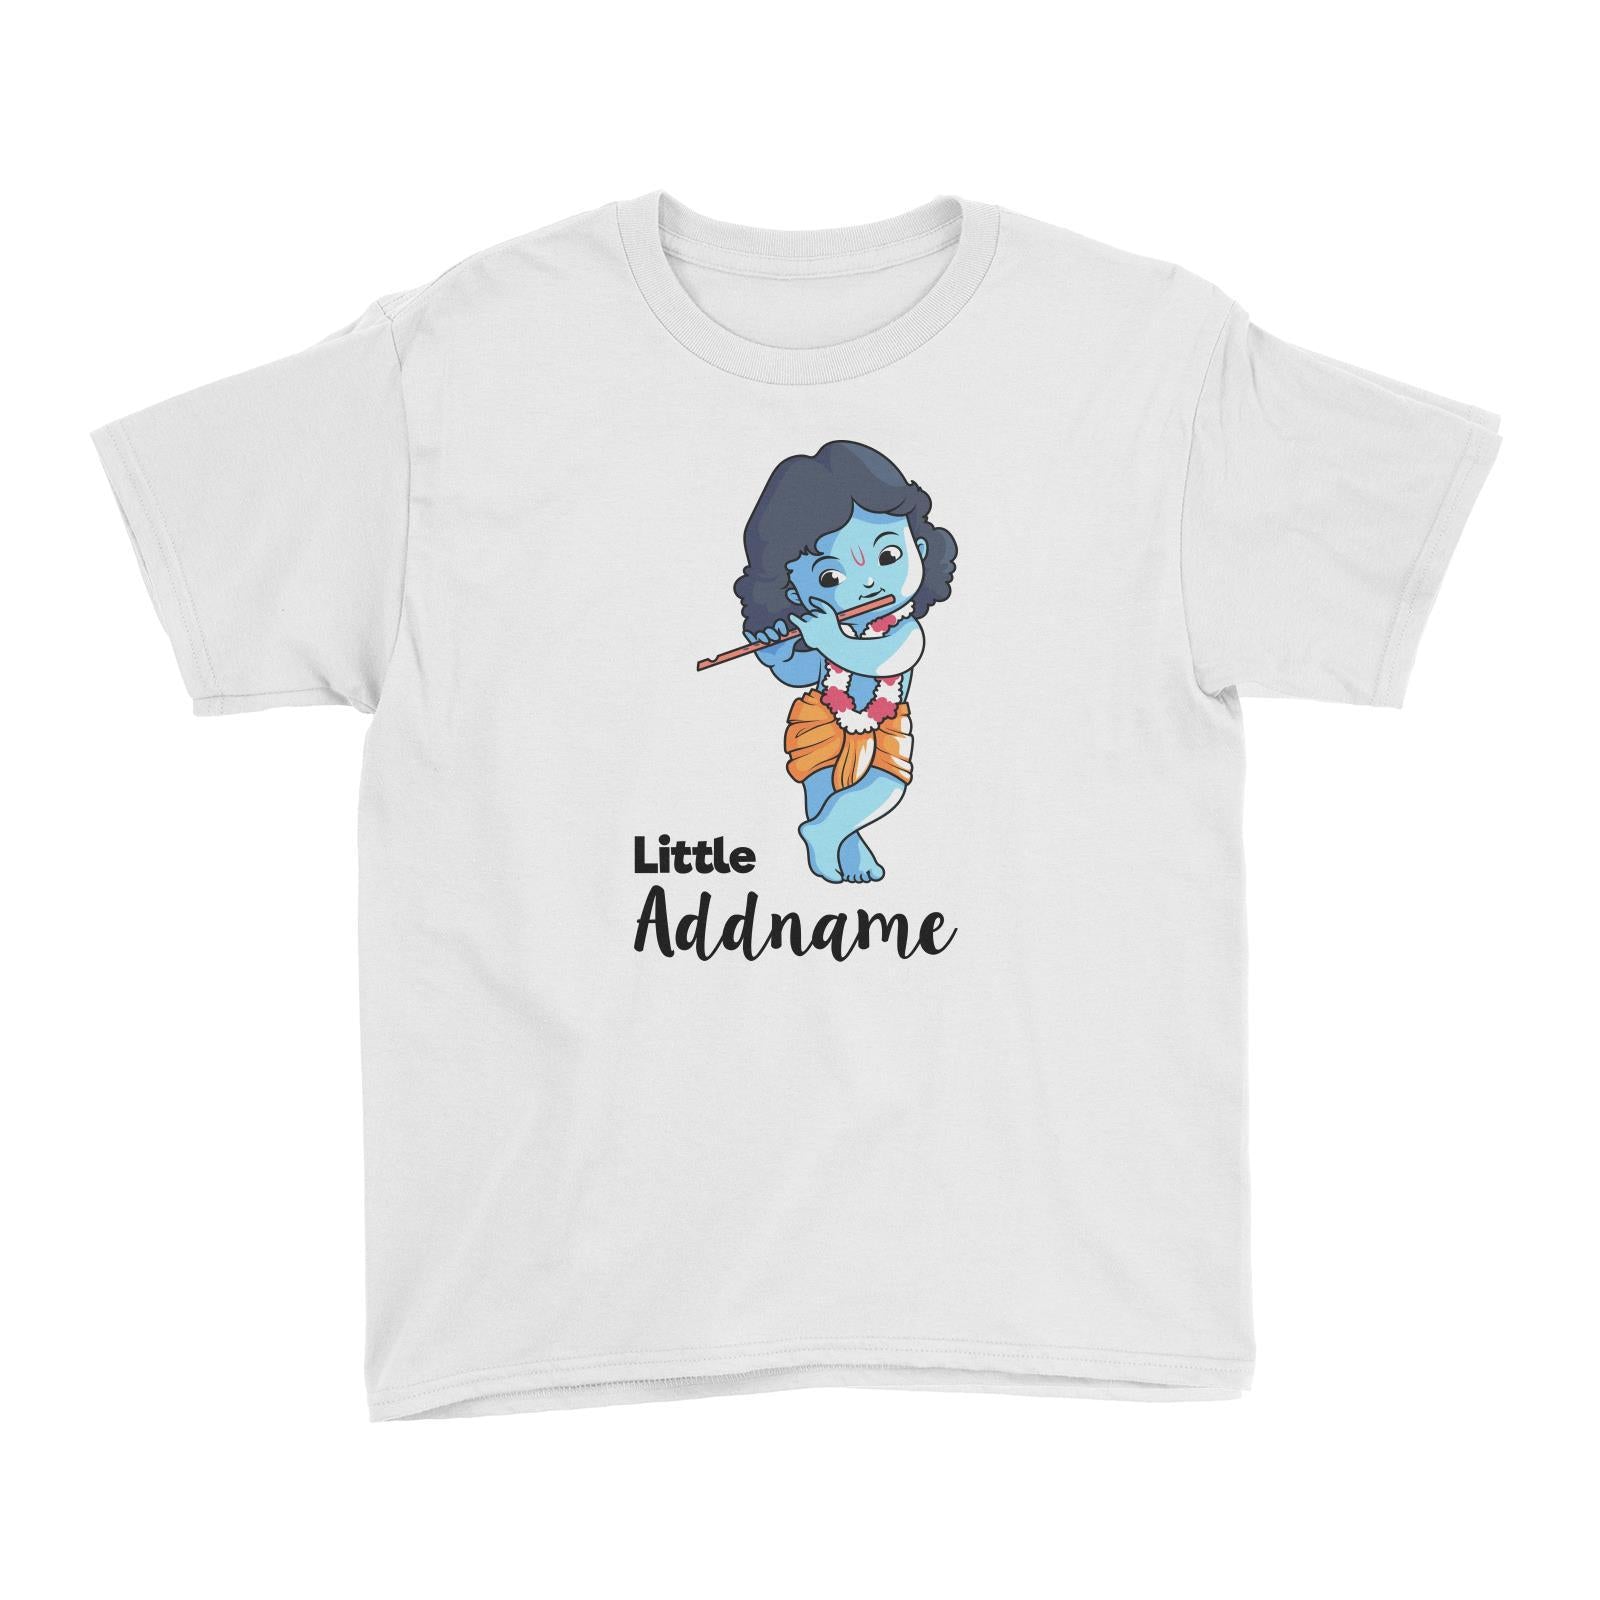 Cute Krishna With Flower Garland Playing Flute Little Addname Kid's T-Shirt